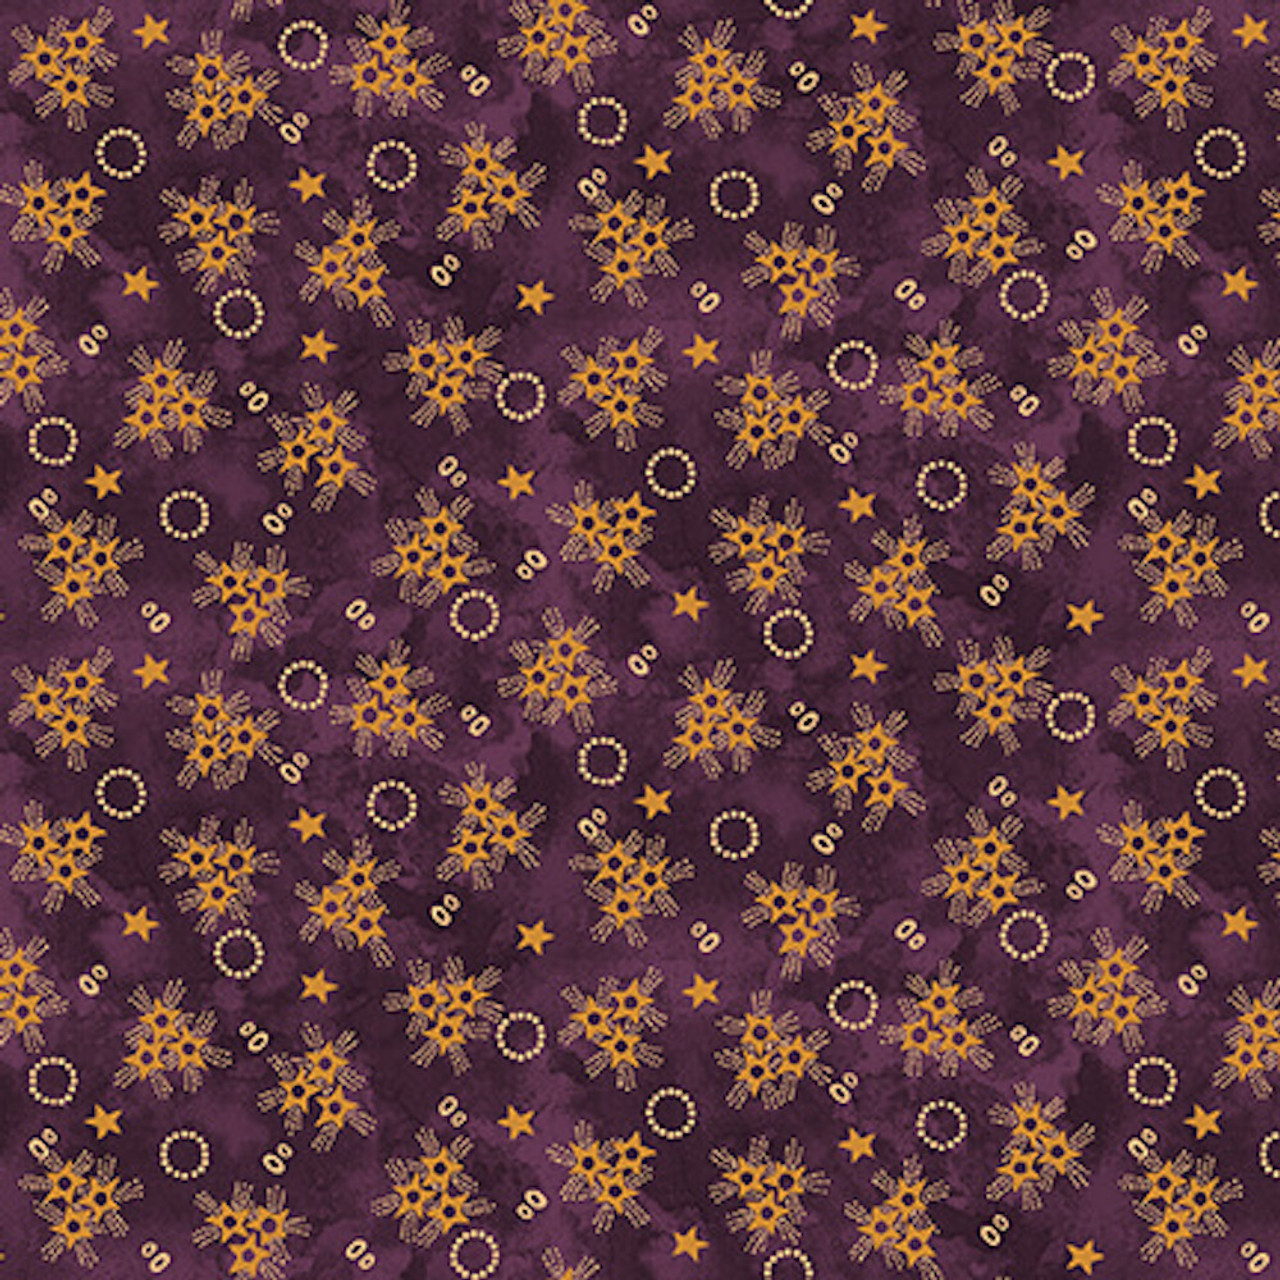 Blank Quilting Abby's Treasures Star Clusters Purple Cotton Reproduction Fabric By The Yard